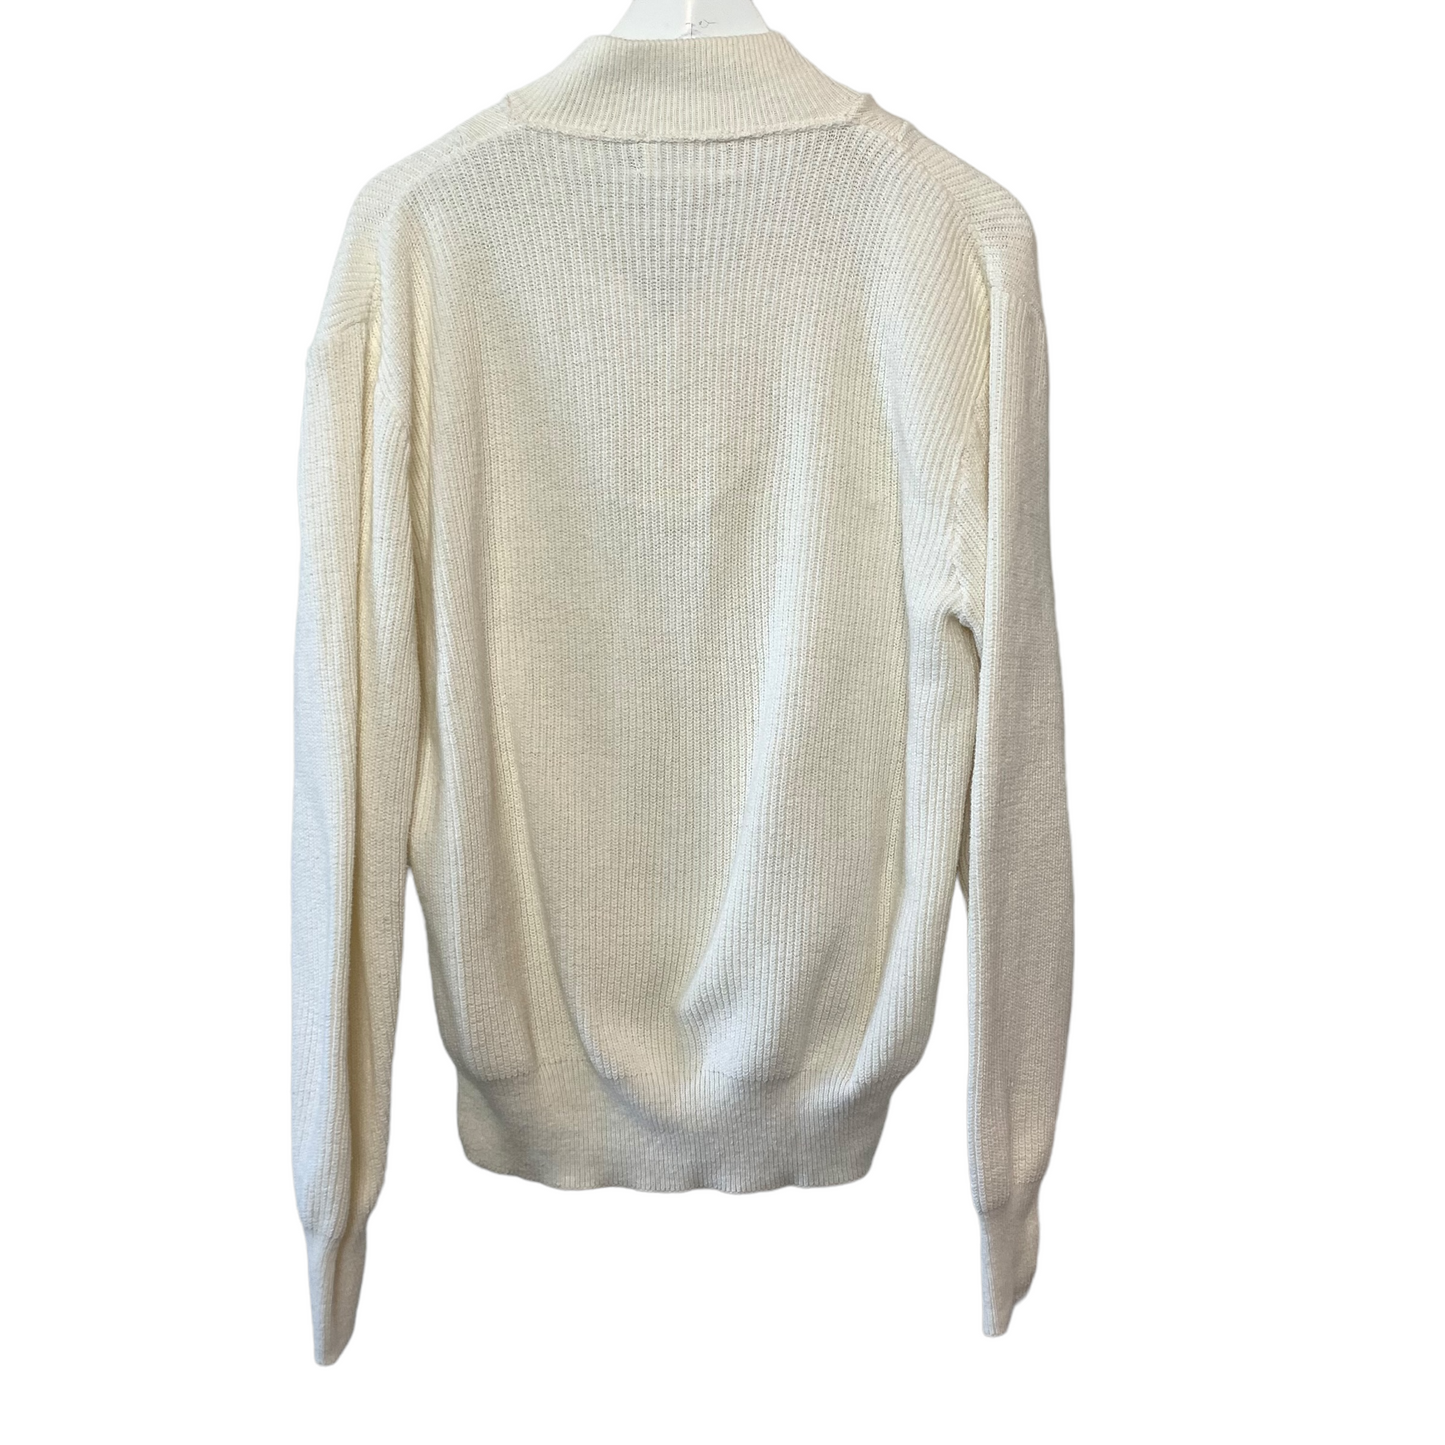 Vintage 90s St. John's Bay Button Henley Pullover Sweater Chunky Knit Grandpa Cream Cotton XL